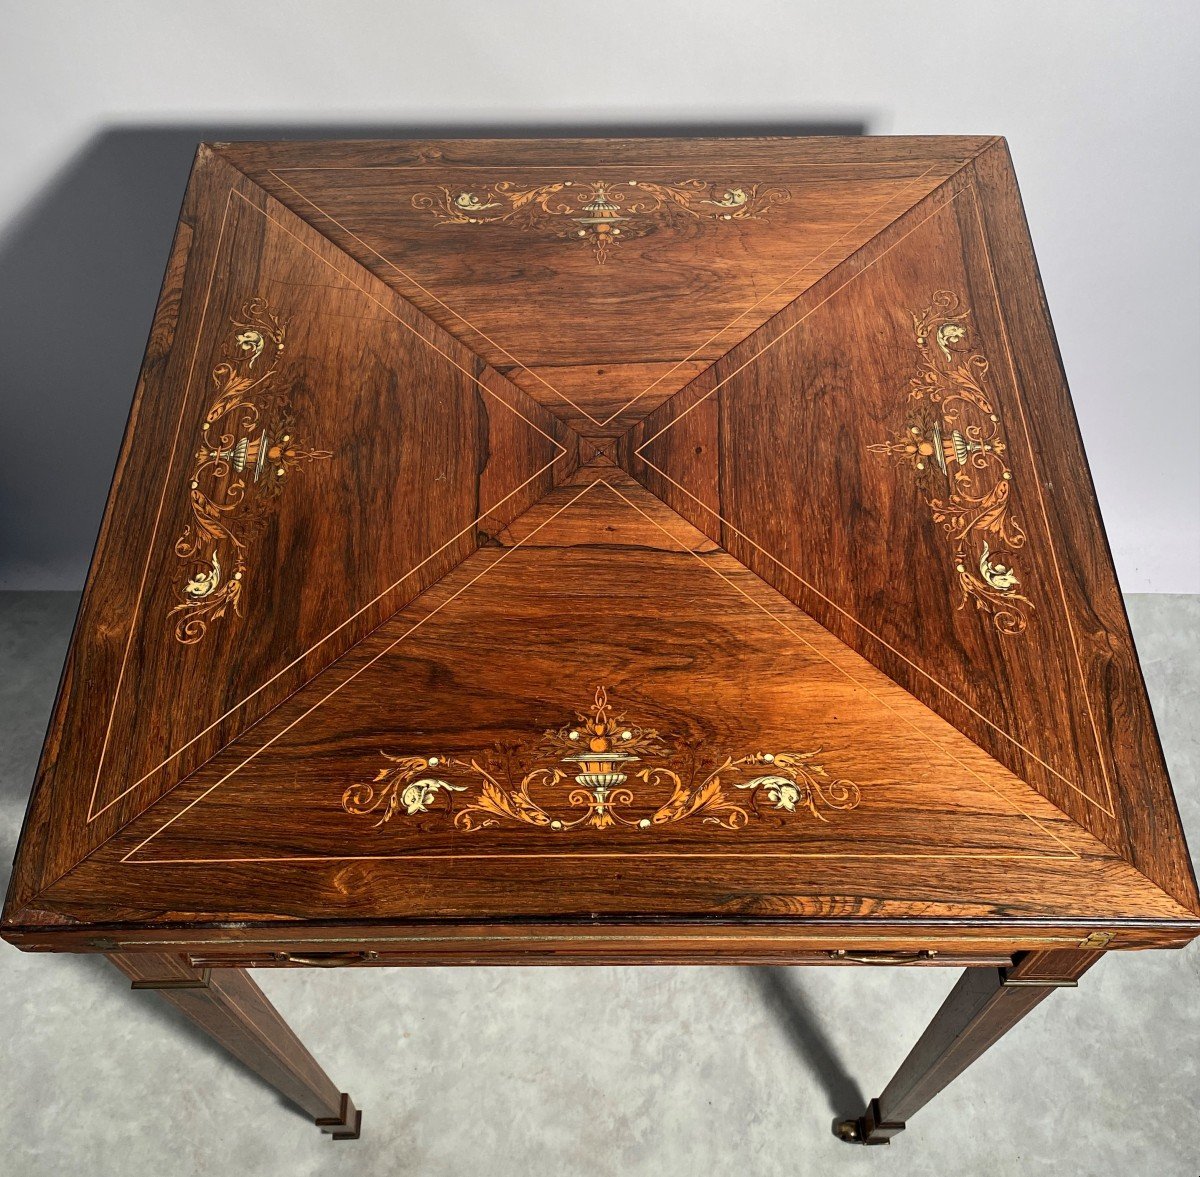 English Game Table Called 'handkerchief' With Inlaid Decor.